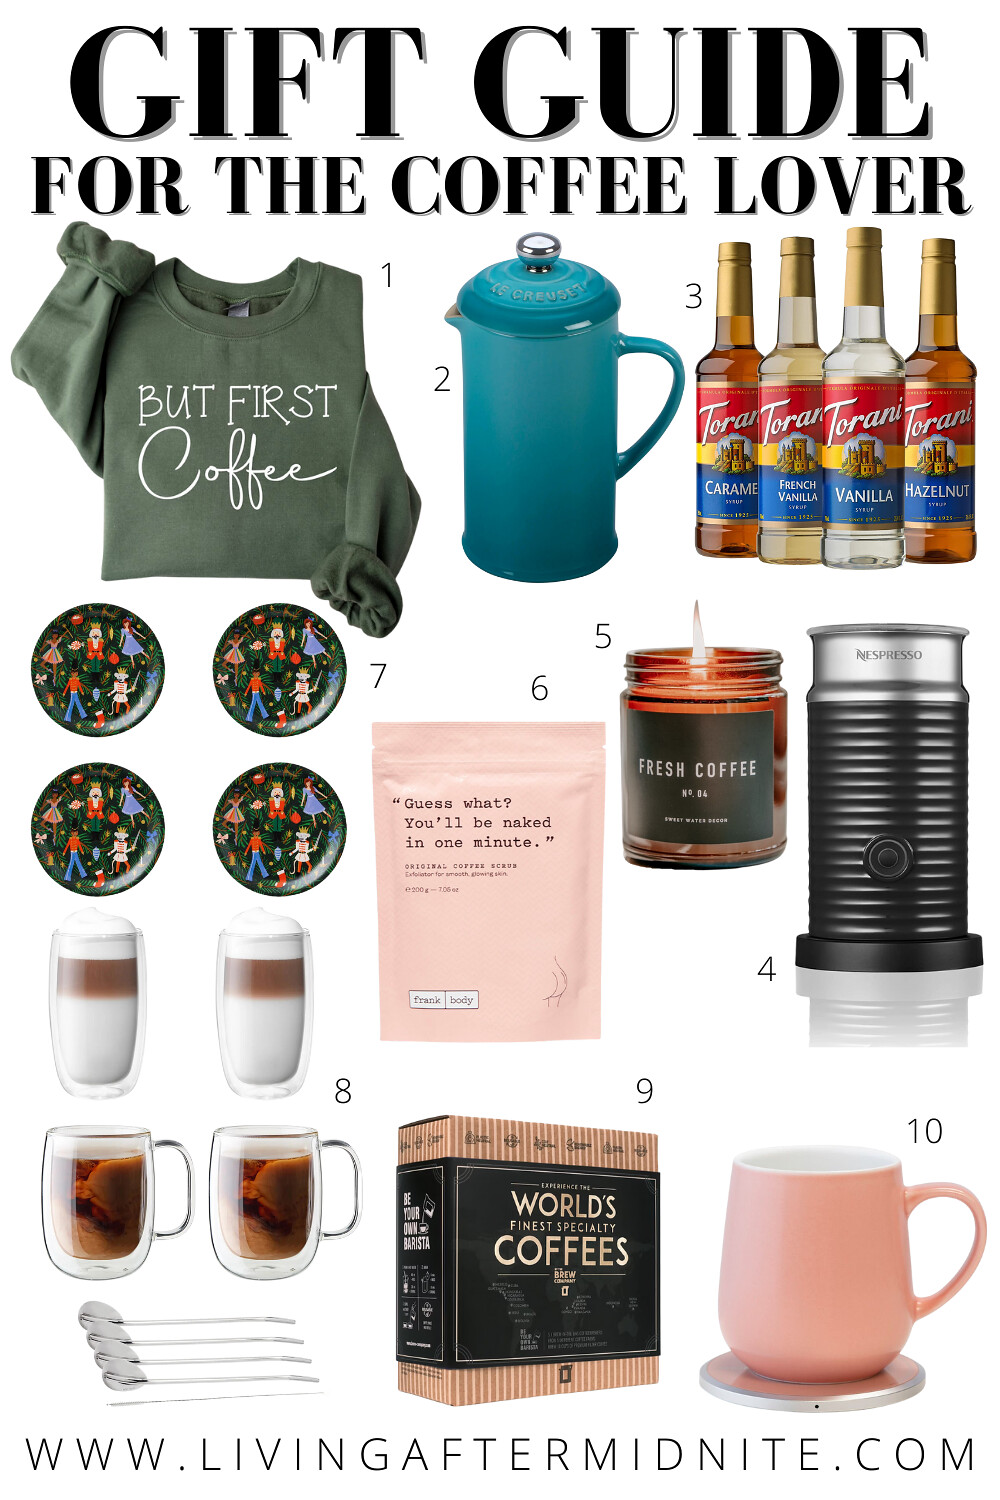 Gift Guide for the Coffee Lover | Wife Gift Ideas | Girlfriend Gift Ideas | Ultimate Holiday Gift Guide | Christmas Presents | Coffee Gifts | Boyfriend Gift Ideas